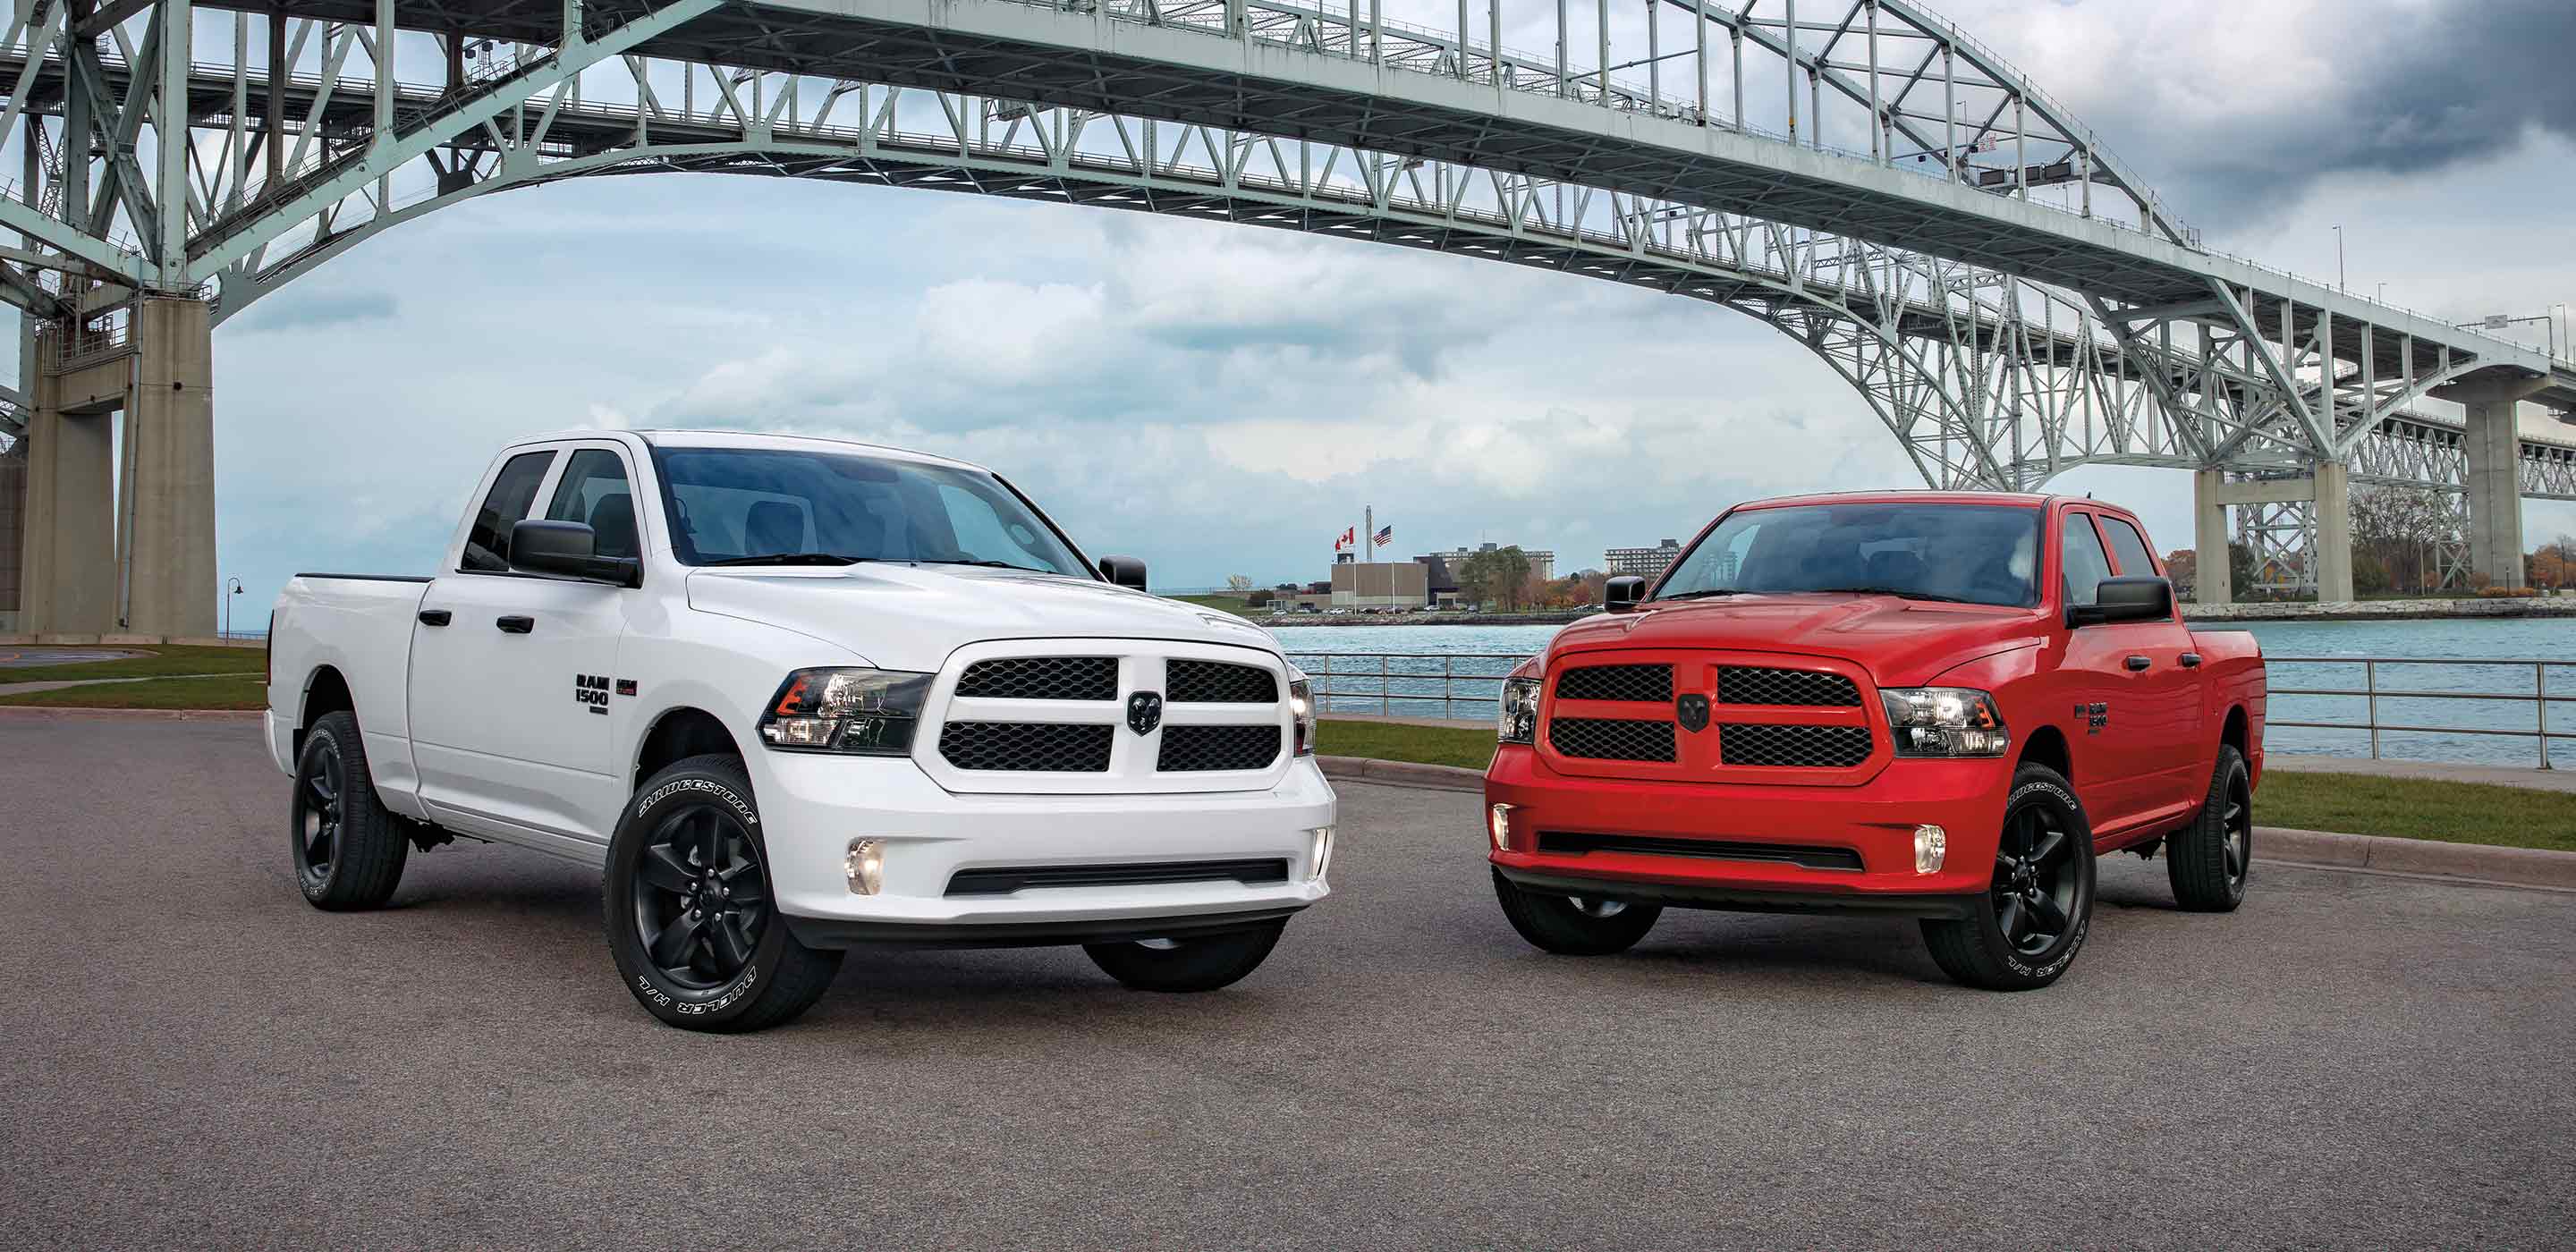 Two Ram Classics parked by a bridge